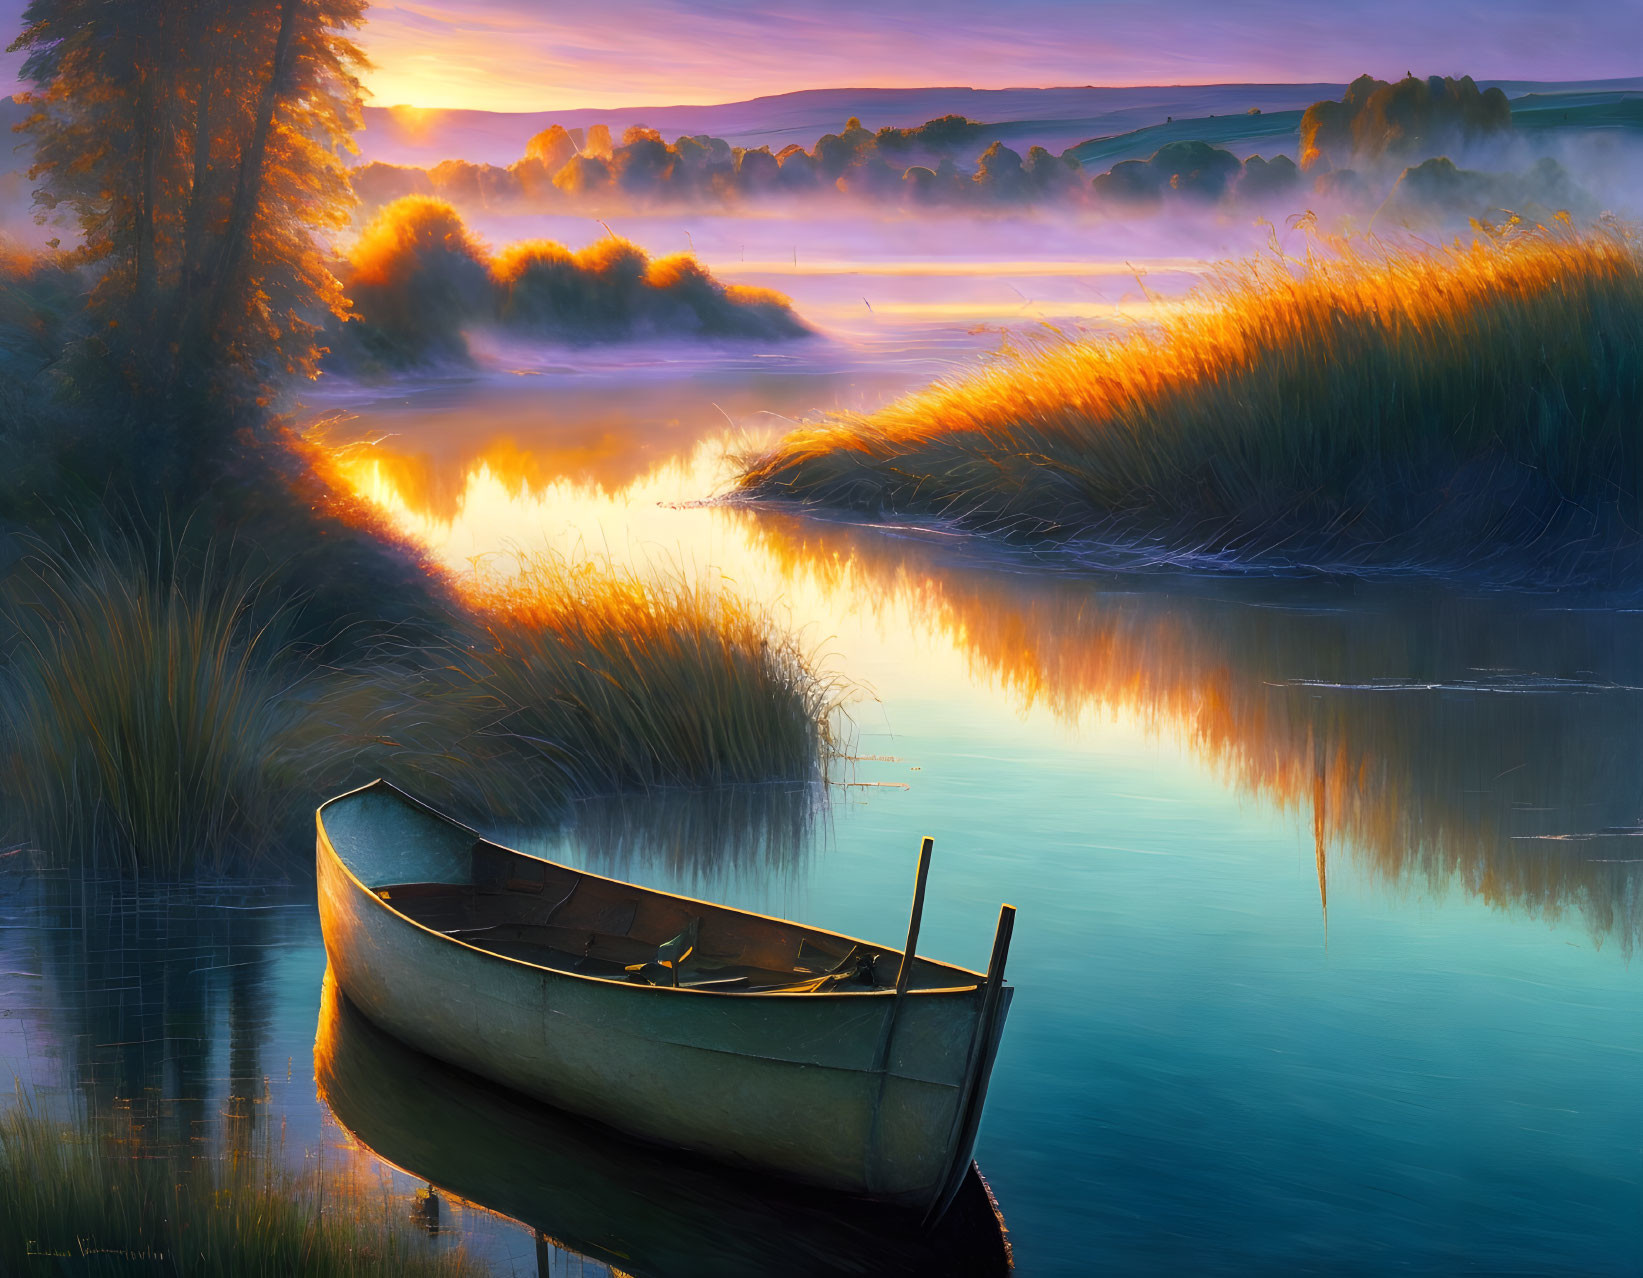 Tranquil sunrise over serene river with canoe and lush reeds